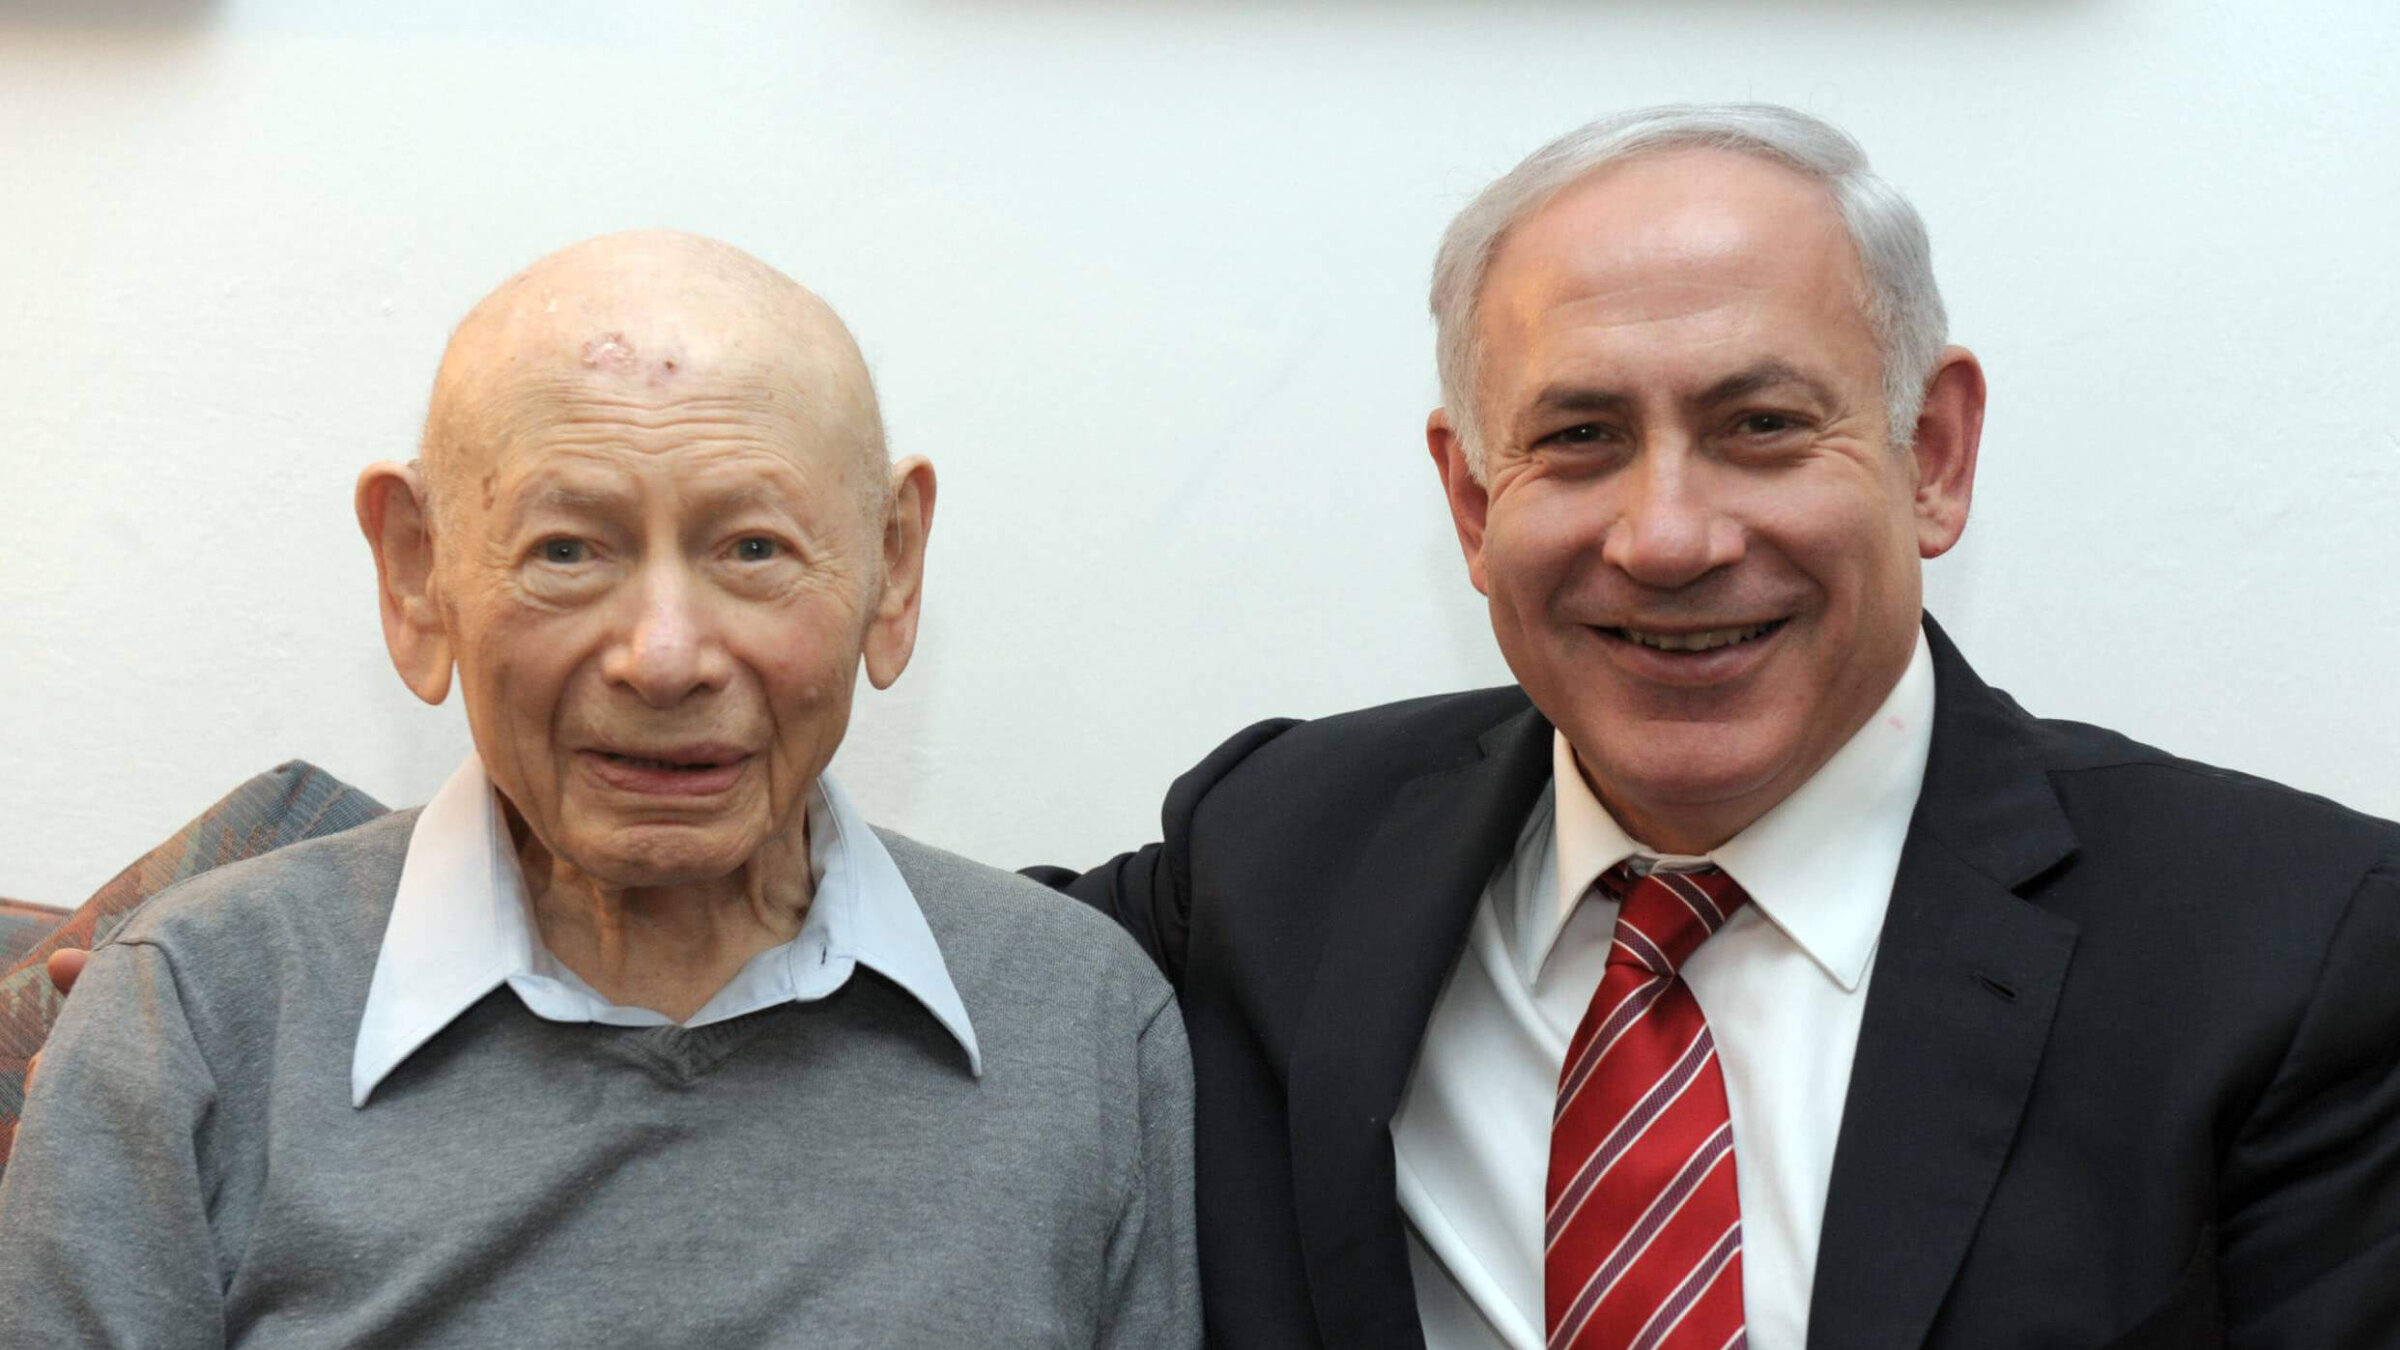 Benjamin Netanyahu (R) sits with his father, Professor Benzion Netanyahu, on March 25, 2012.